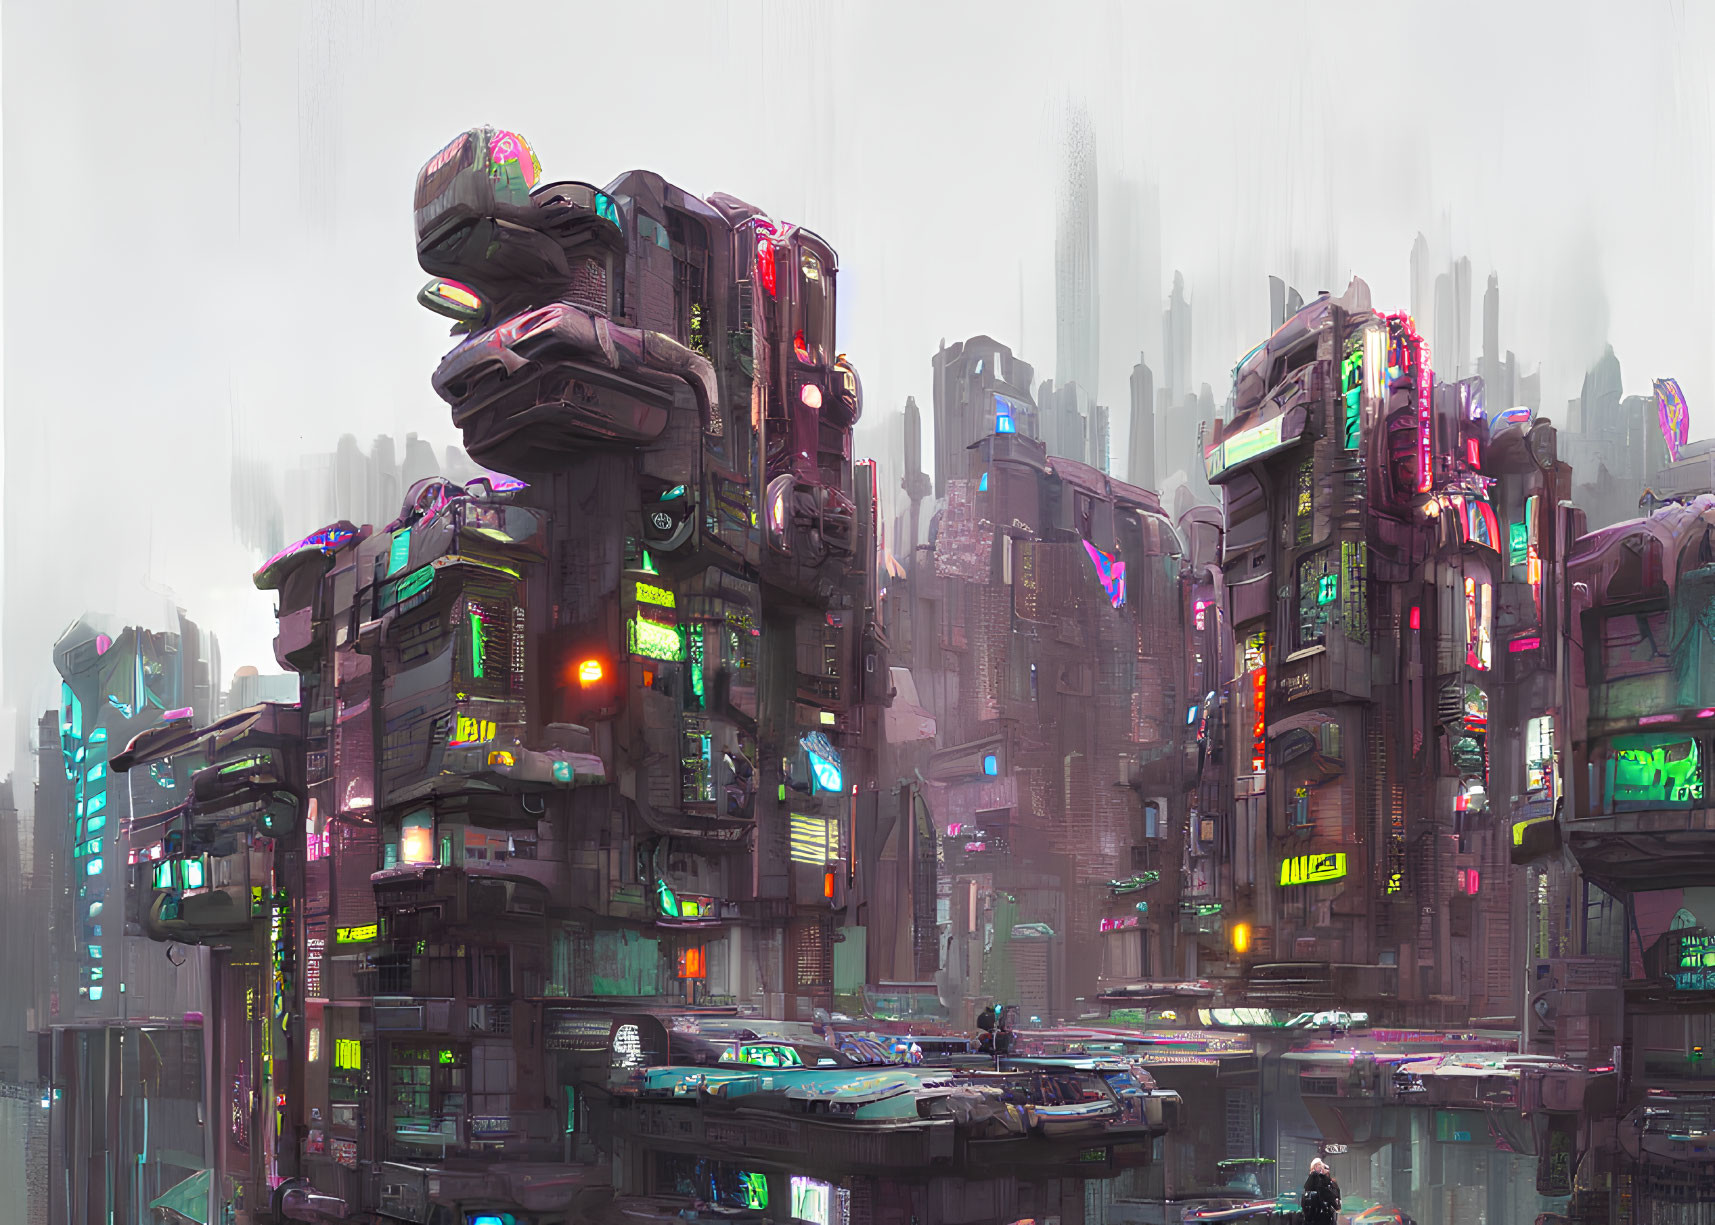 Futuristic cityscape with towering neon-lit buildings under overcast sky